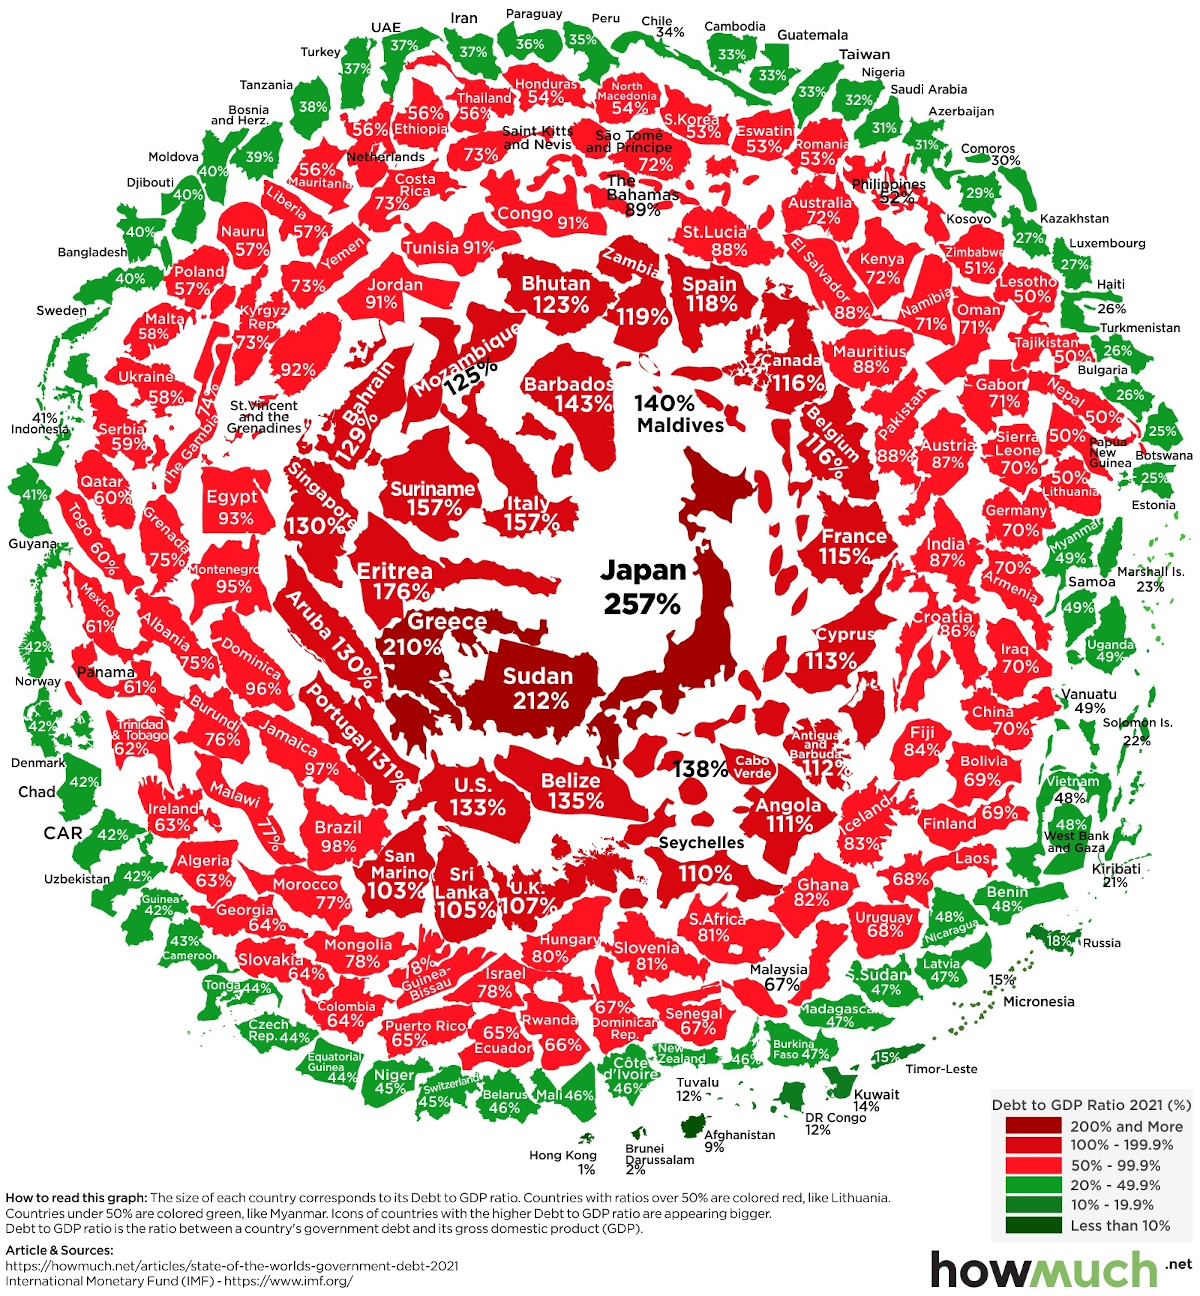 Visualizing the Snowball of Government Debt in 2021